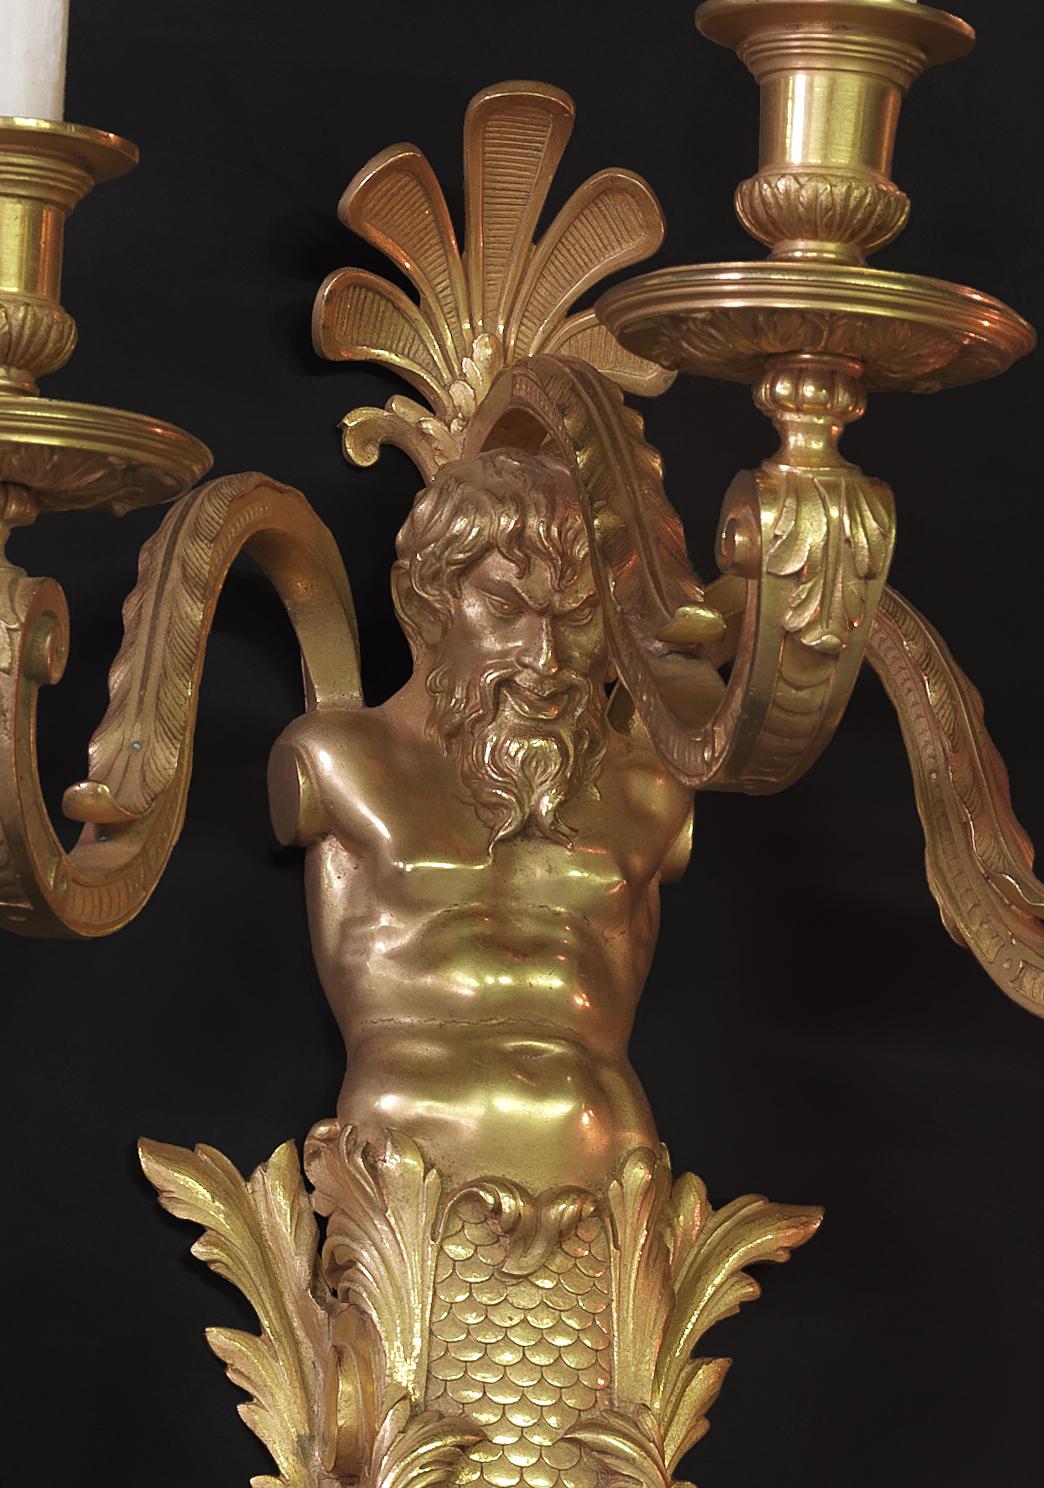 French A Pair of Gilt-Bronze Three-Light Wall-Appliques by Henry Dasson, Circa 1880